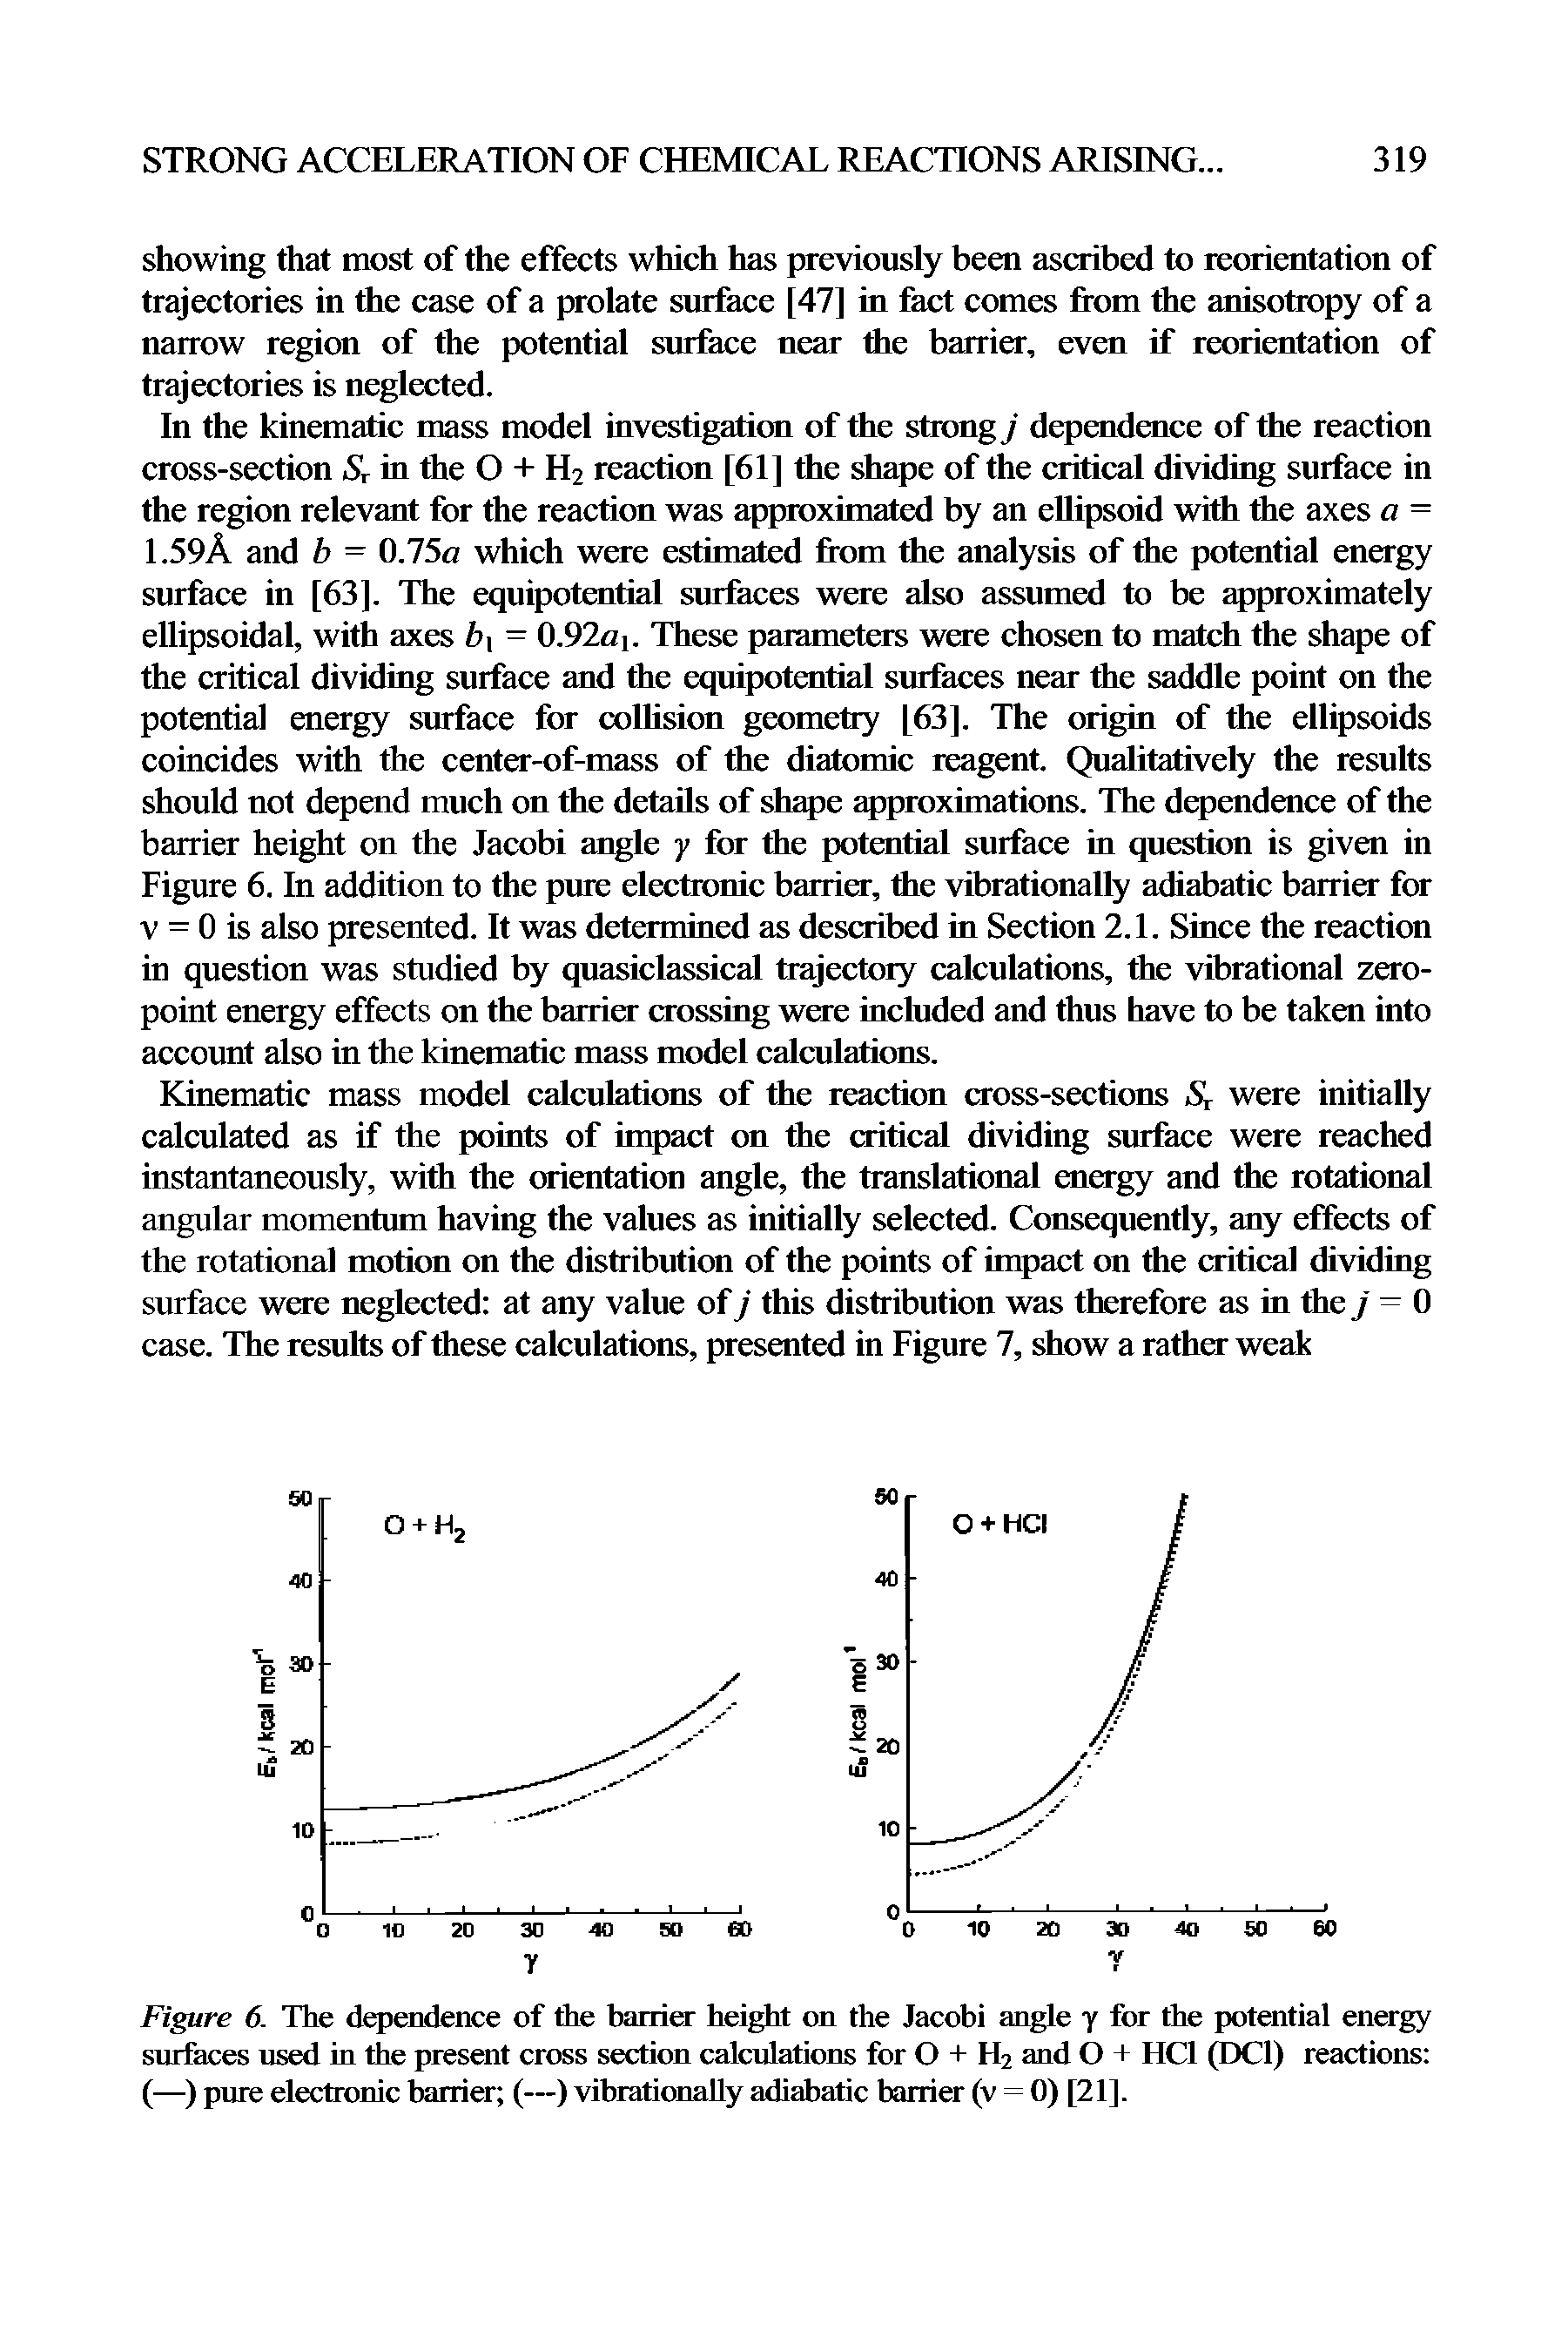 Figure 6. The dependence of the harrier height on the Jacobi angle y for the potential energy surfaces used in the present cross section calculations for O + H2 and O + HCl (DCl) reactions (—) pure electronic barrier (—) vibrationally adiabatic barrier (v = 0) [21].